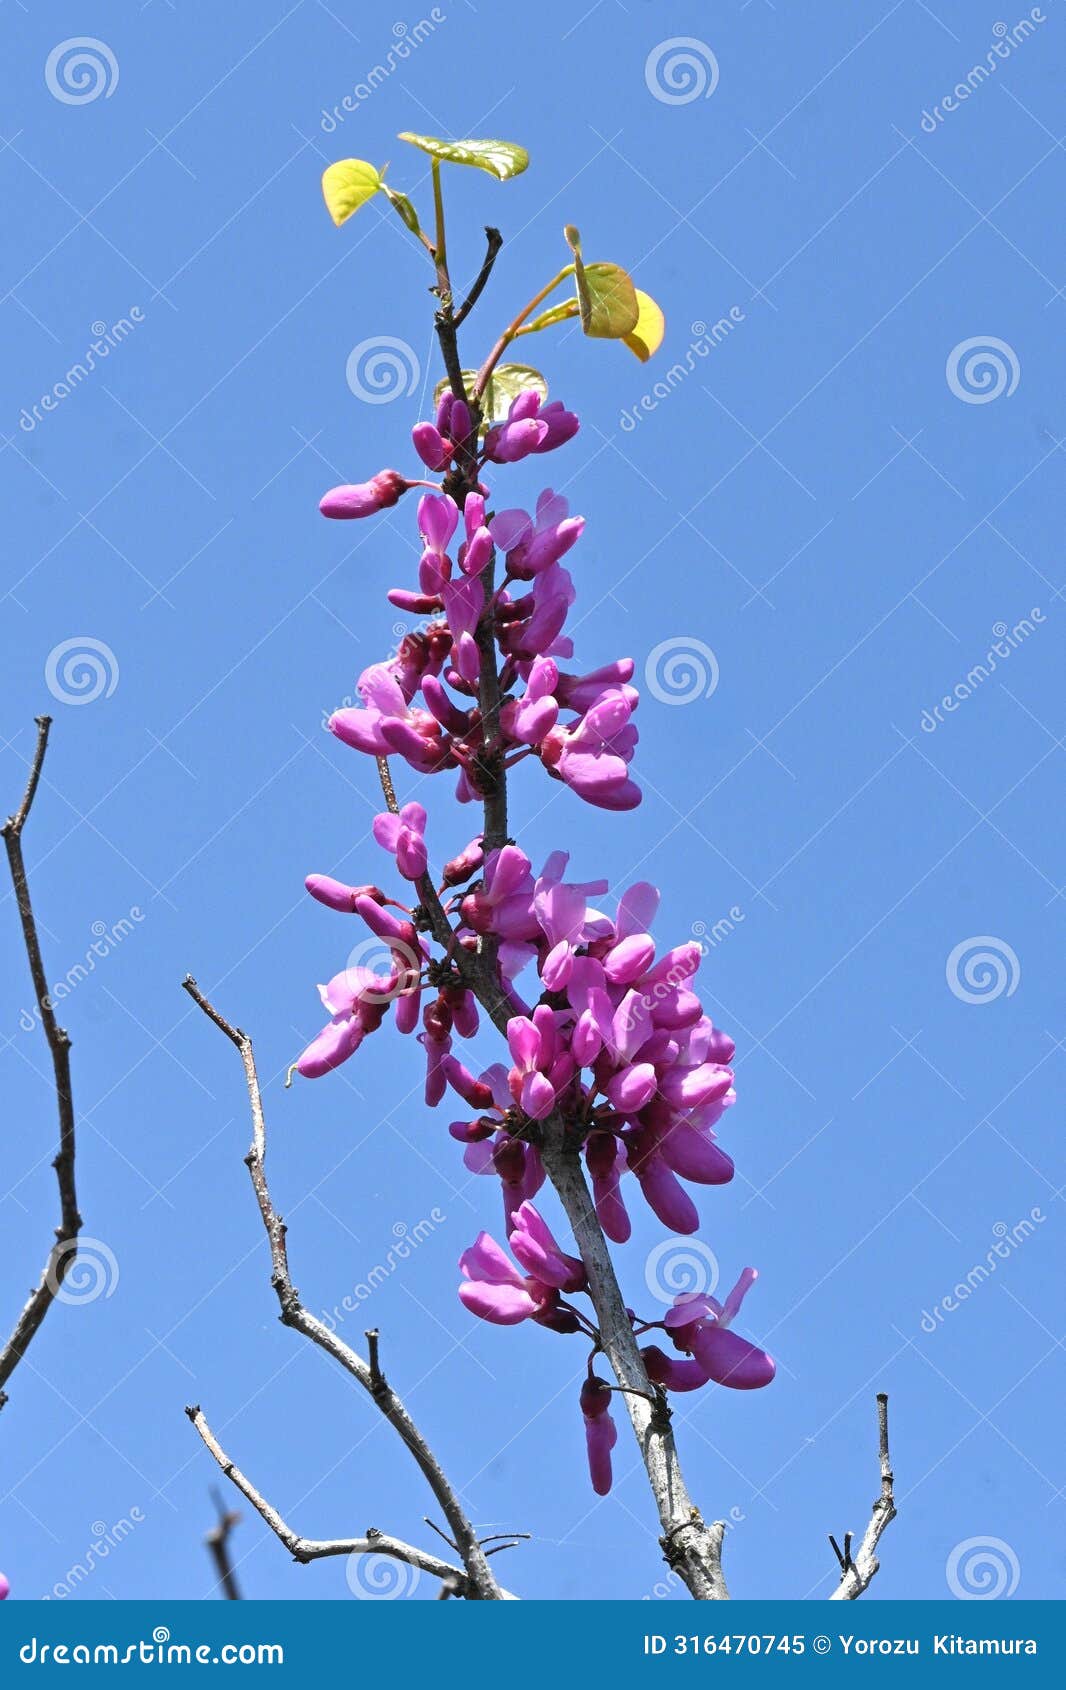 chinese redbud ( cercis chinensis ) flowers. fabaceae deciduous tree.